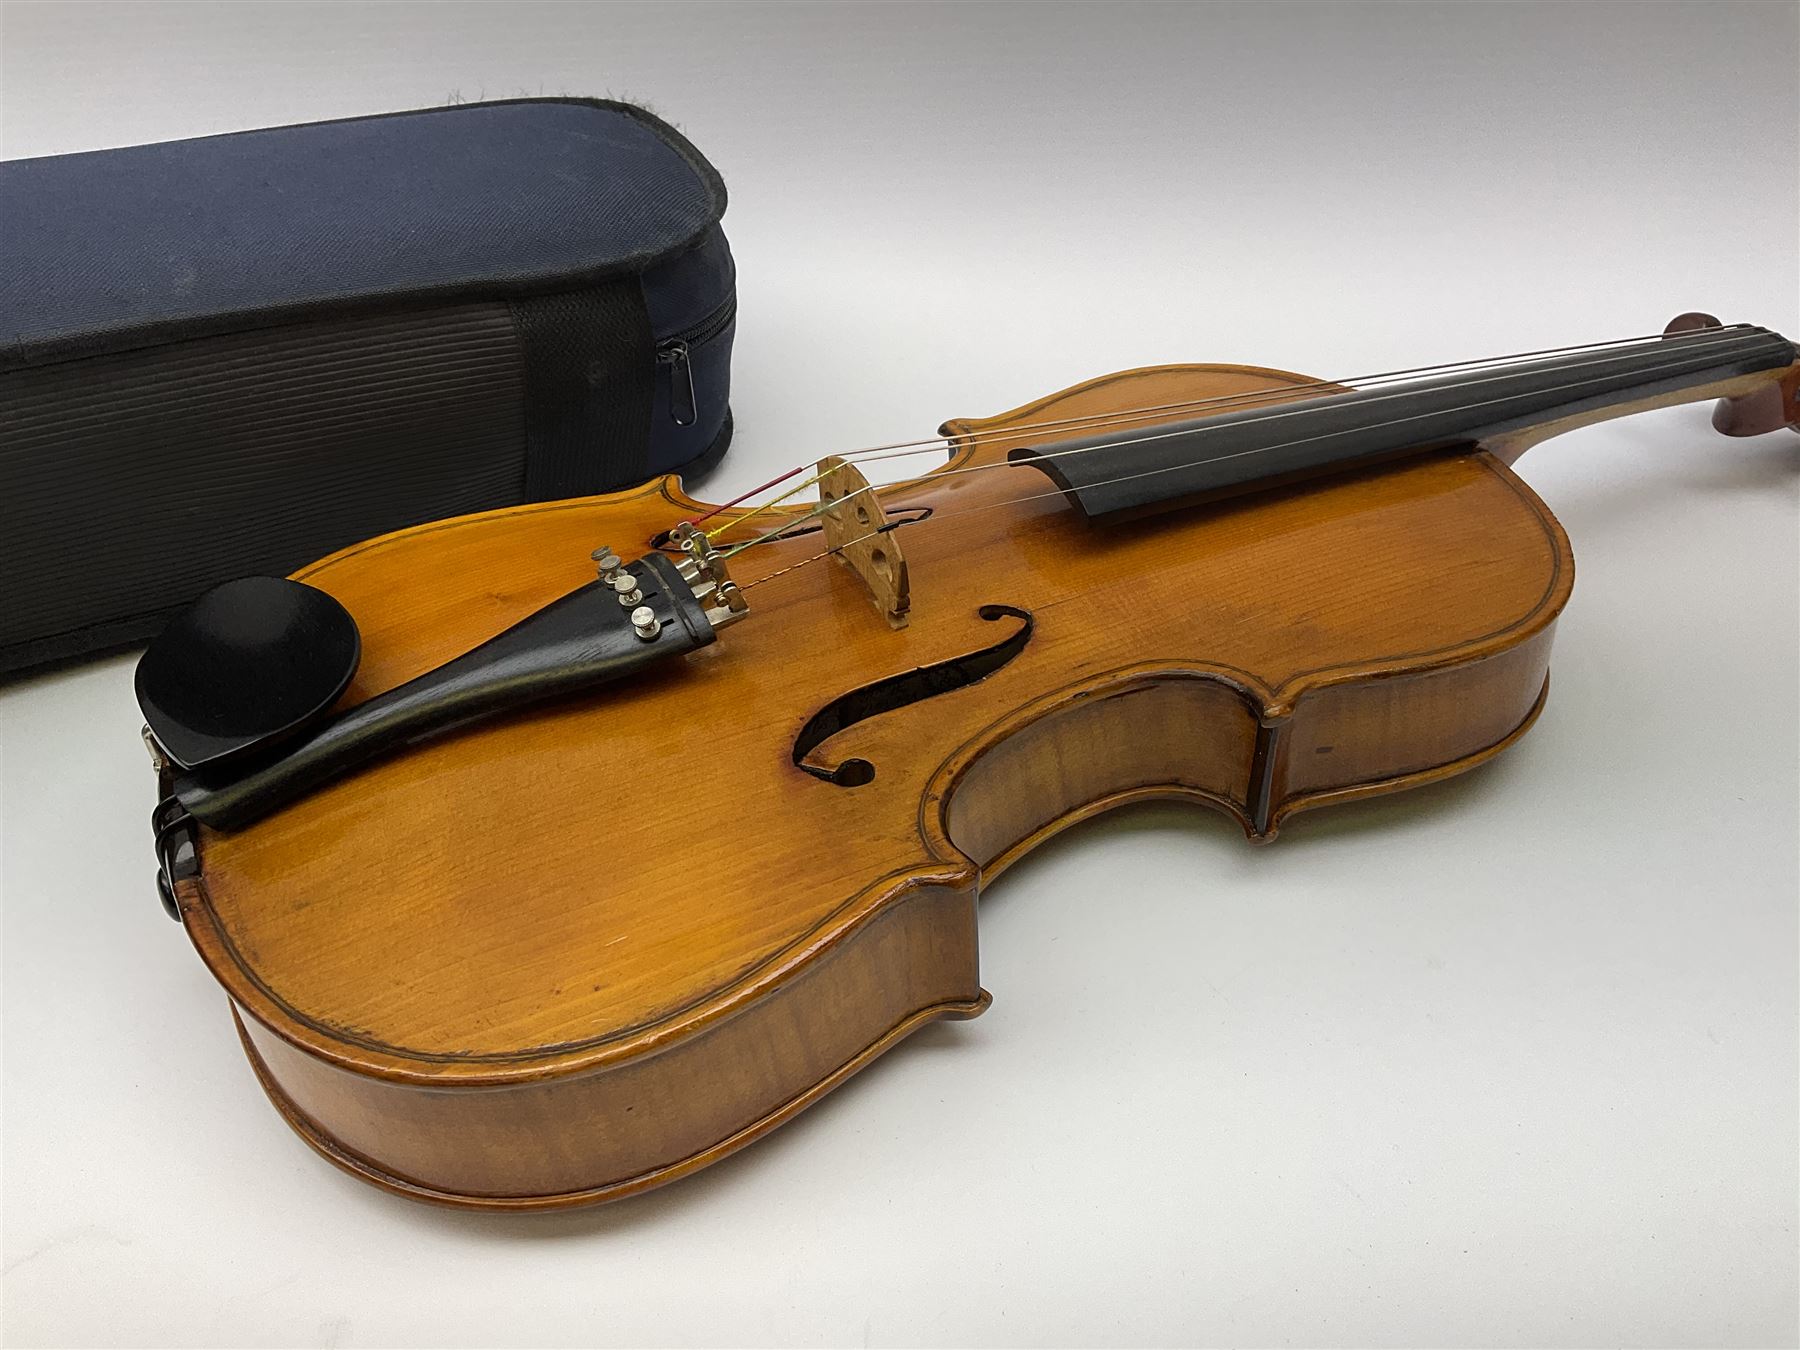 1920s continental large viola with 42cm two-piece maple back and ribs and wide grain sprucewood top - Image 13 of 21